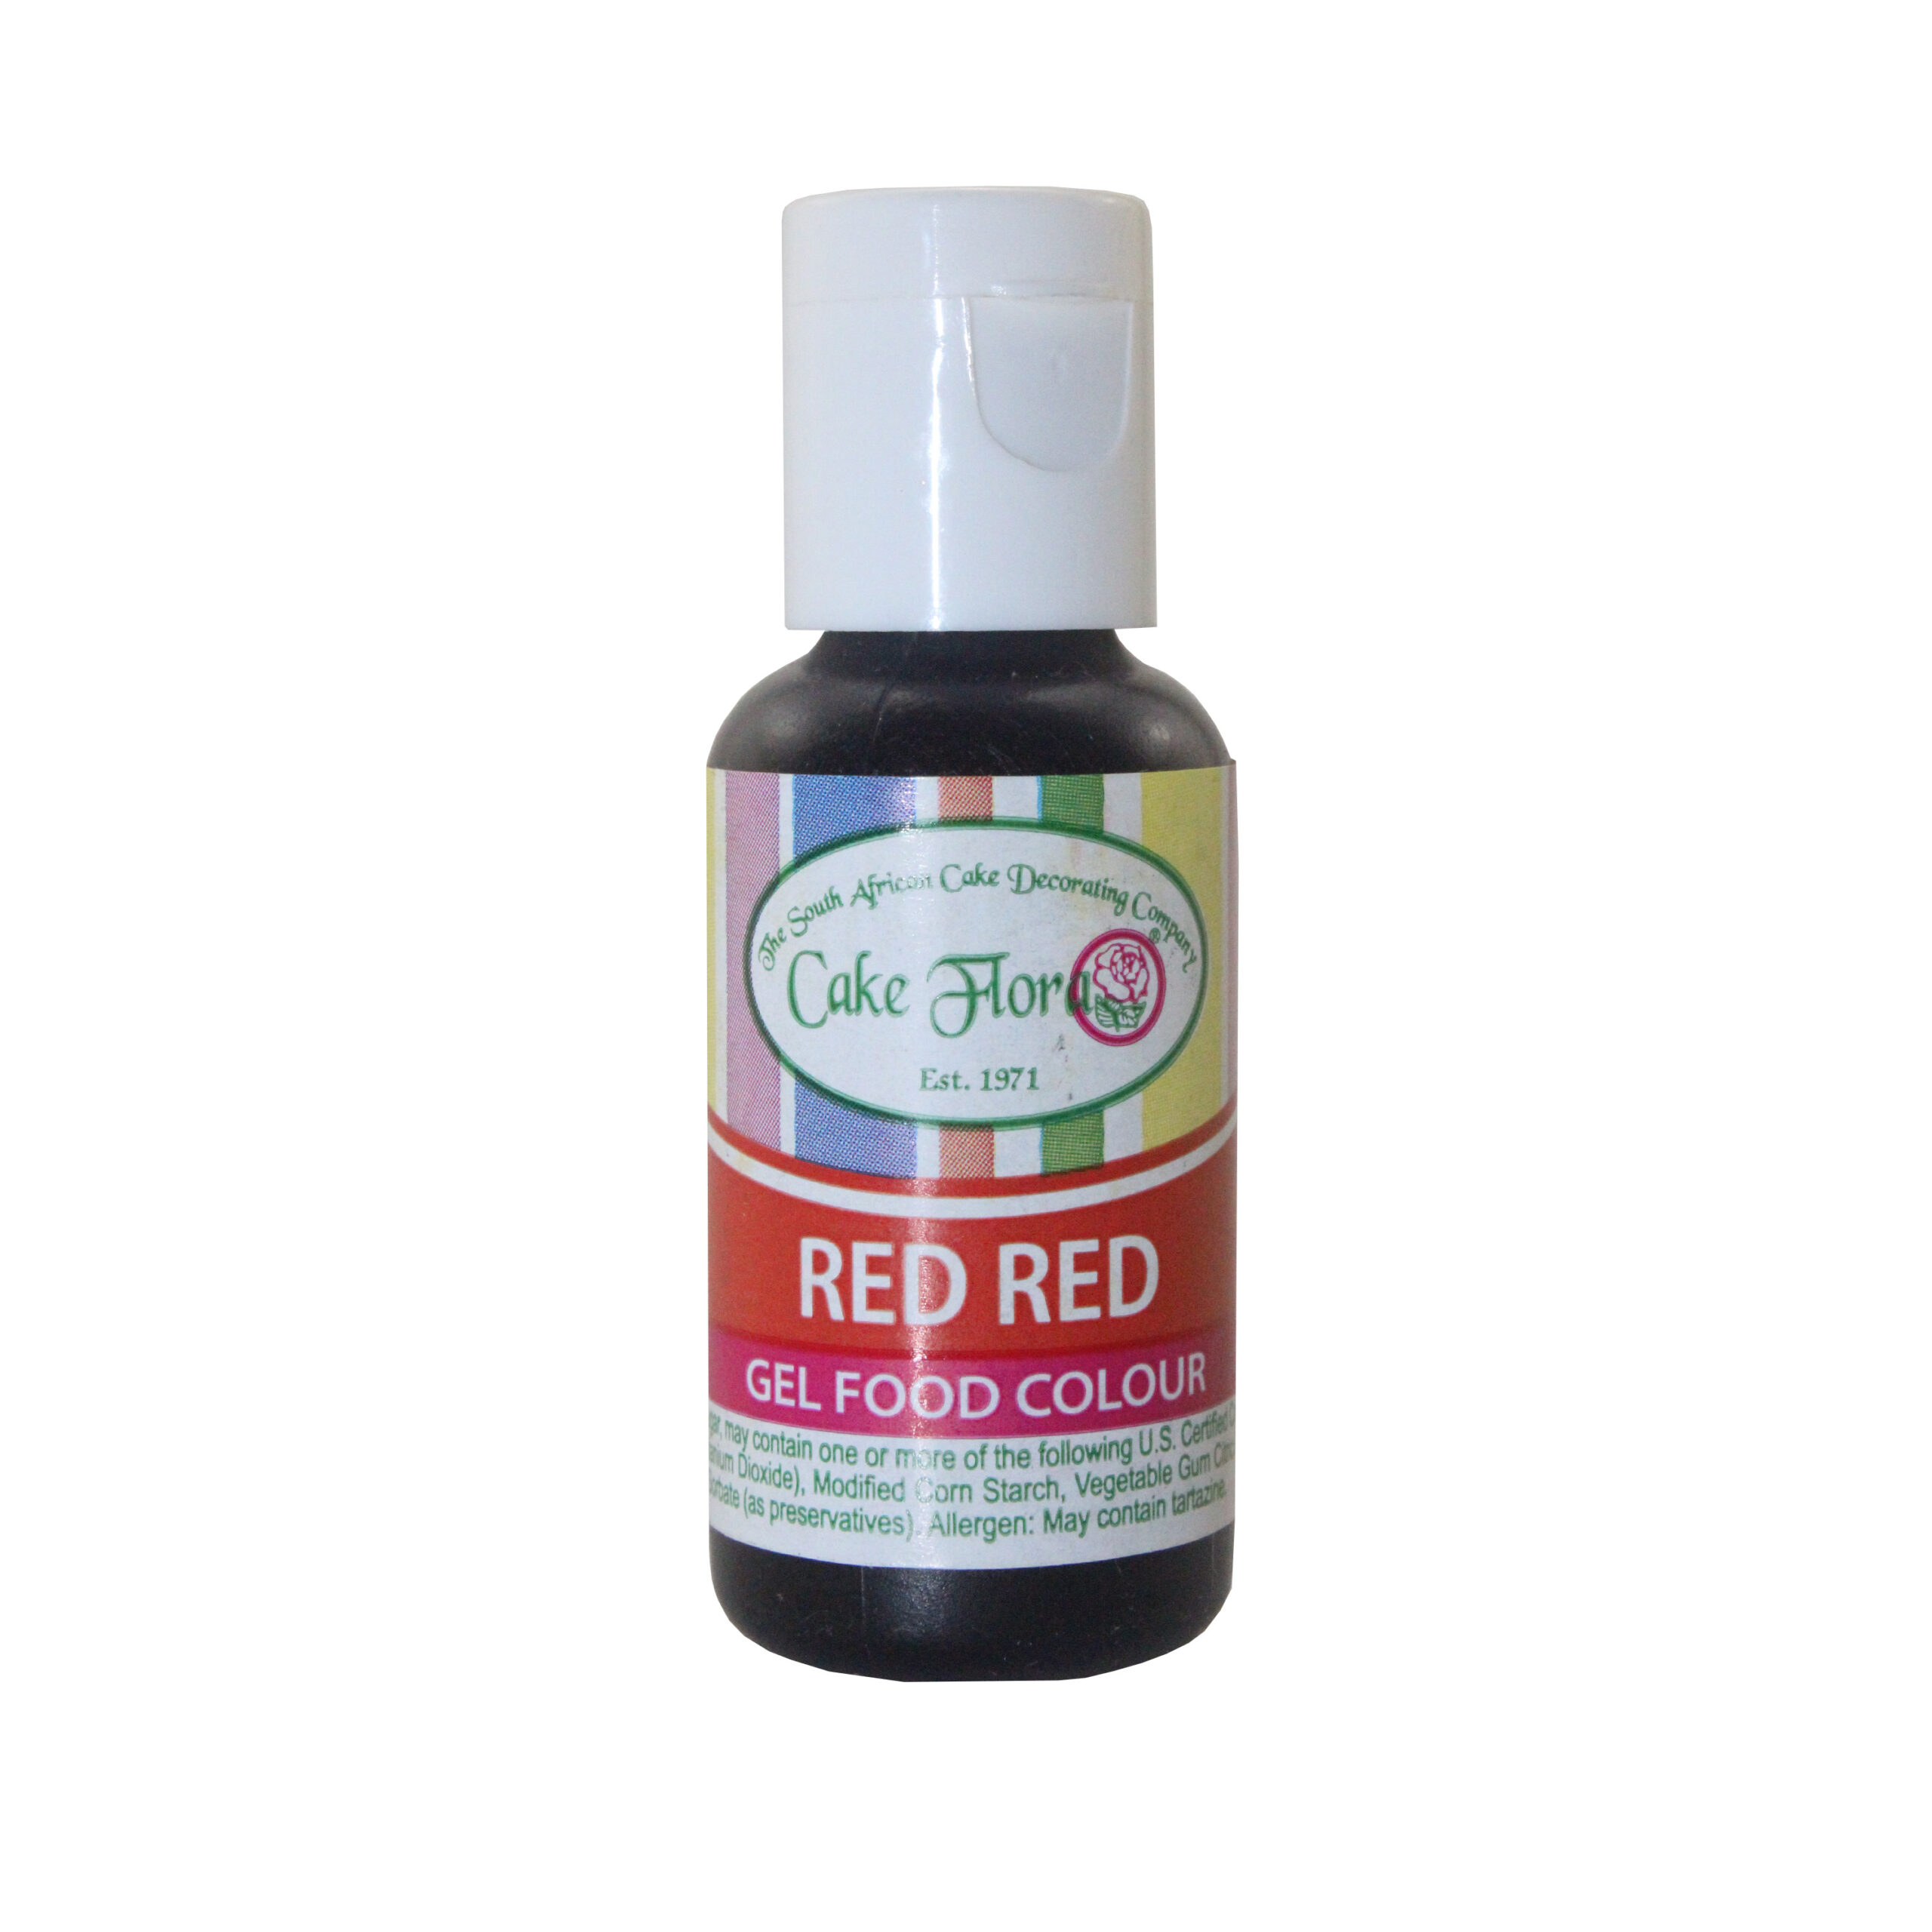 BAKING GEL
COLOURS CAKE
FLORA RED RED
21g